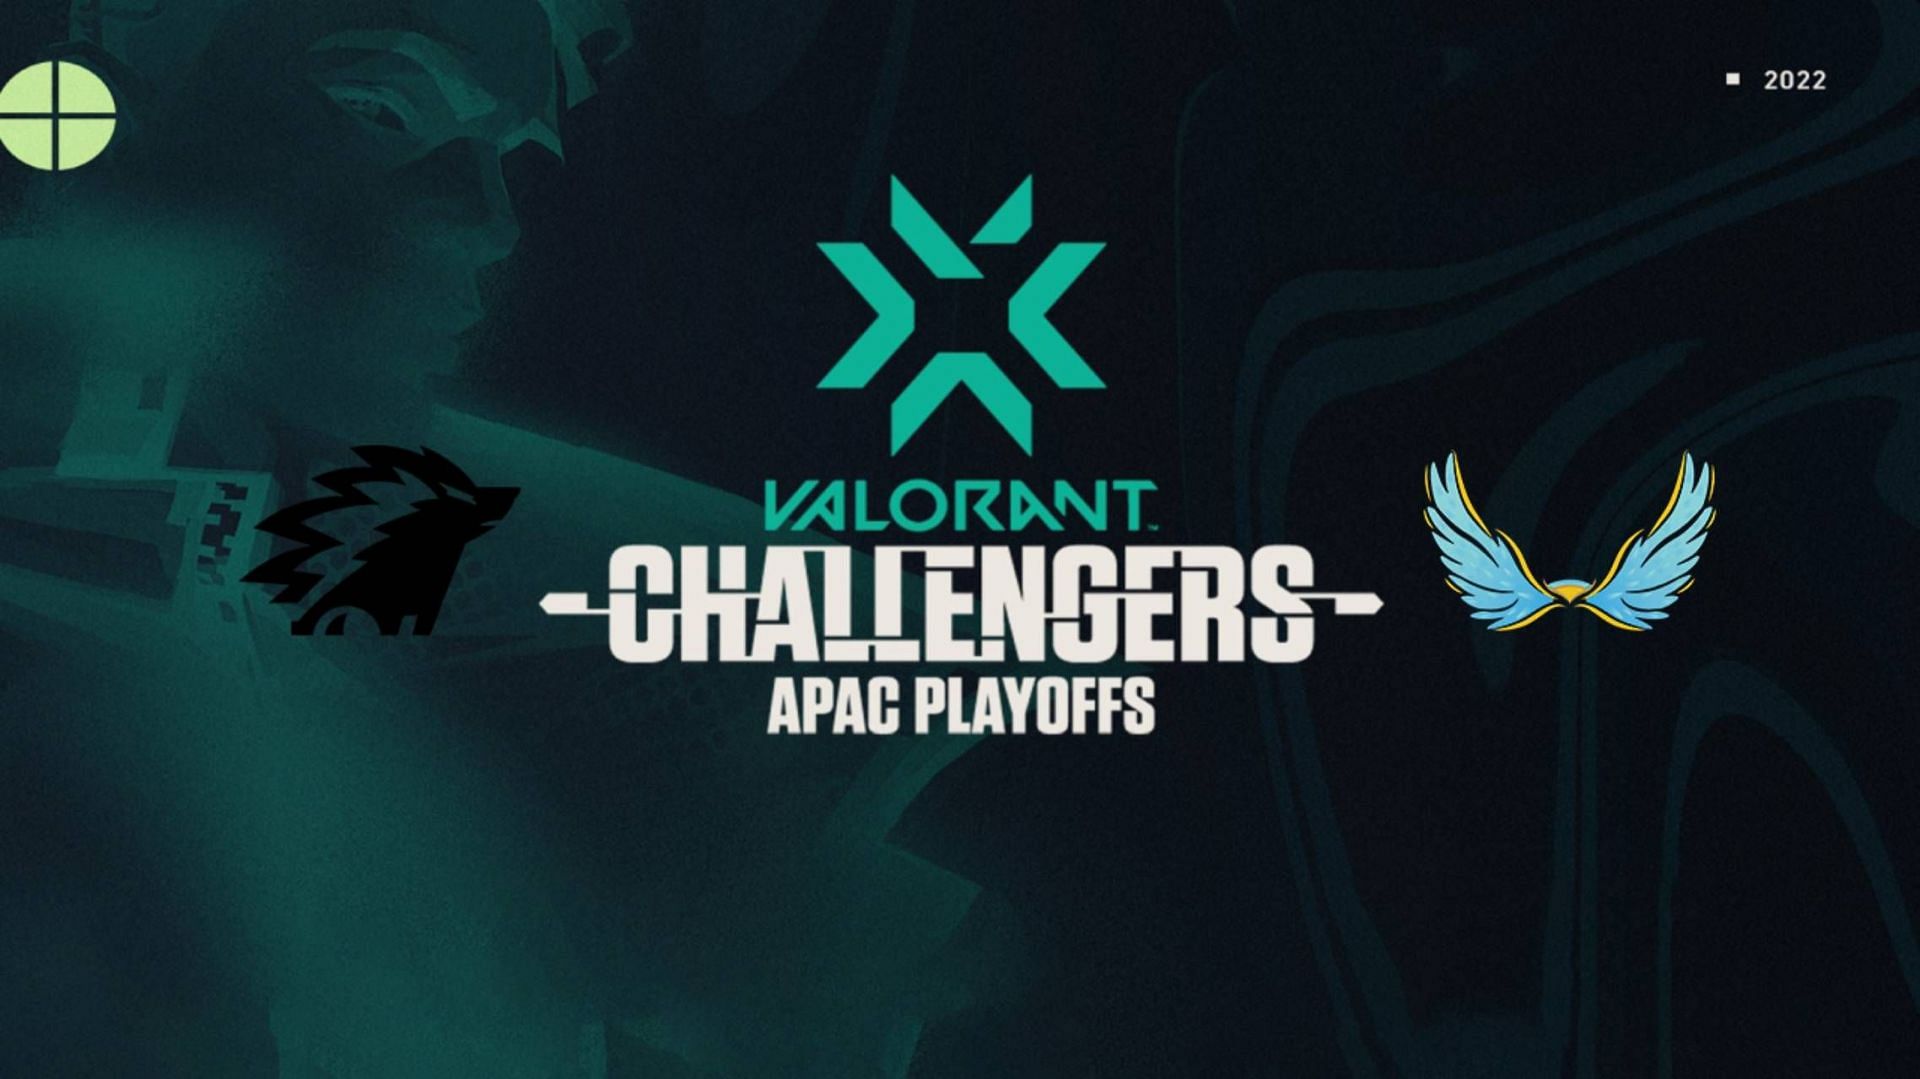 ONIC G and NAOS Esports in the VCT APAC Stage-1 Challengers (Image via Sportskeeda)